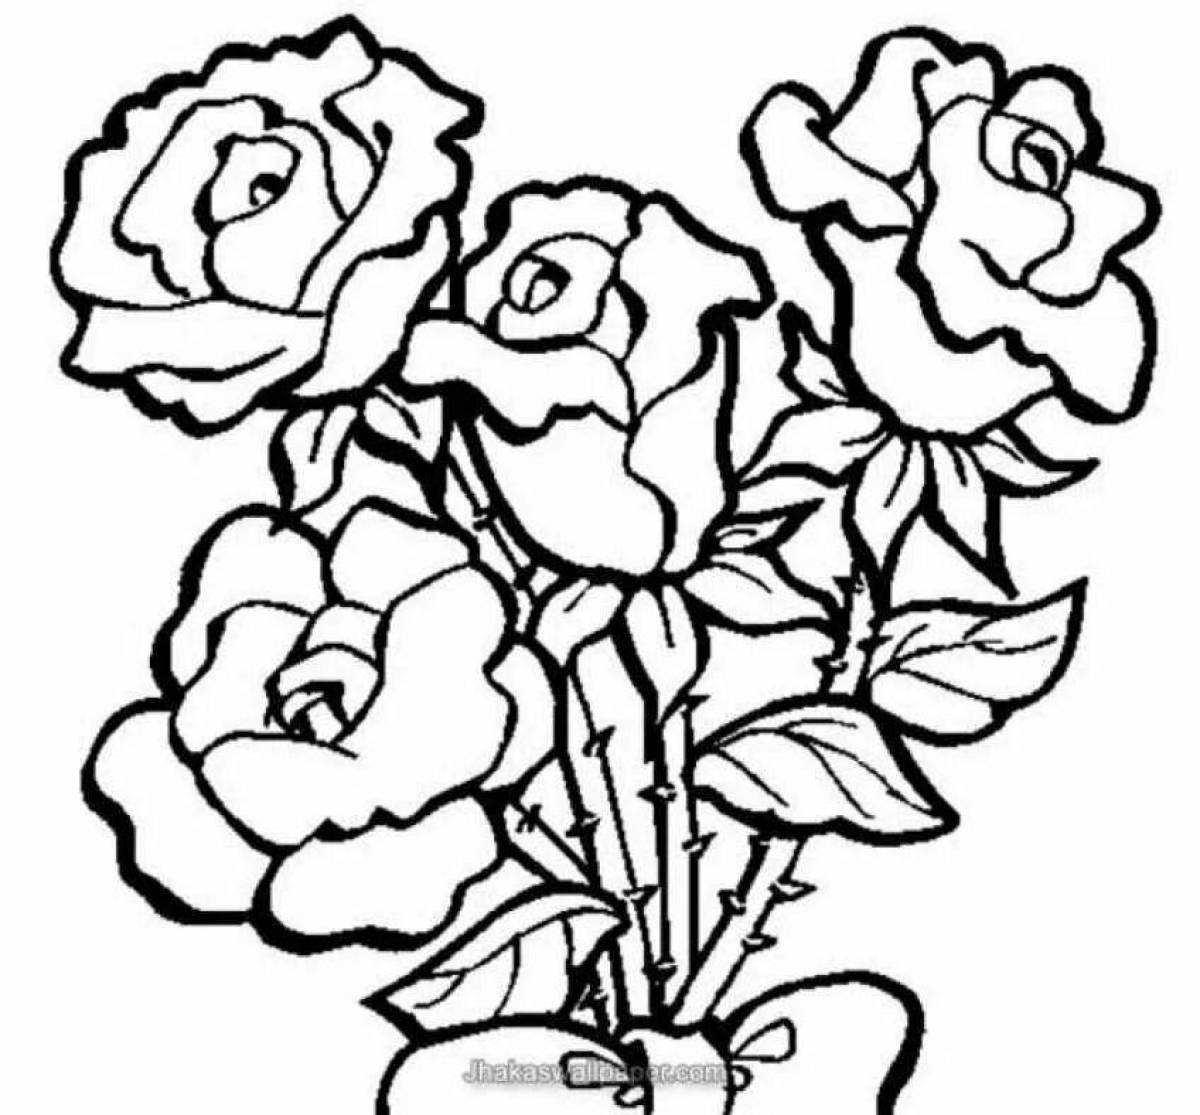 Coloring page serendipitous beautiful flower